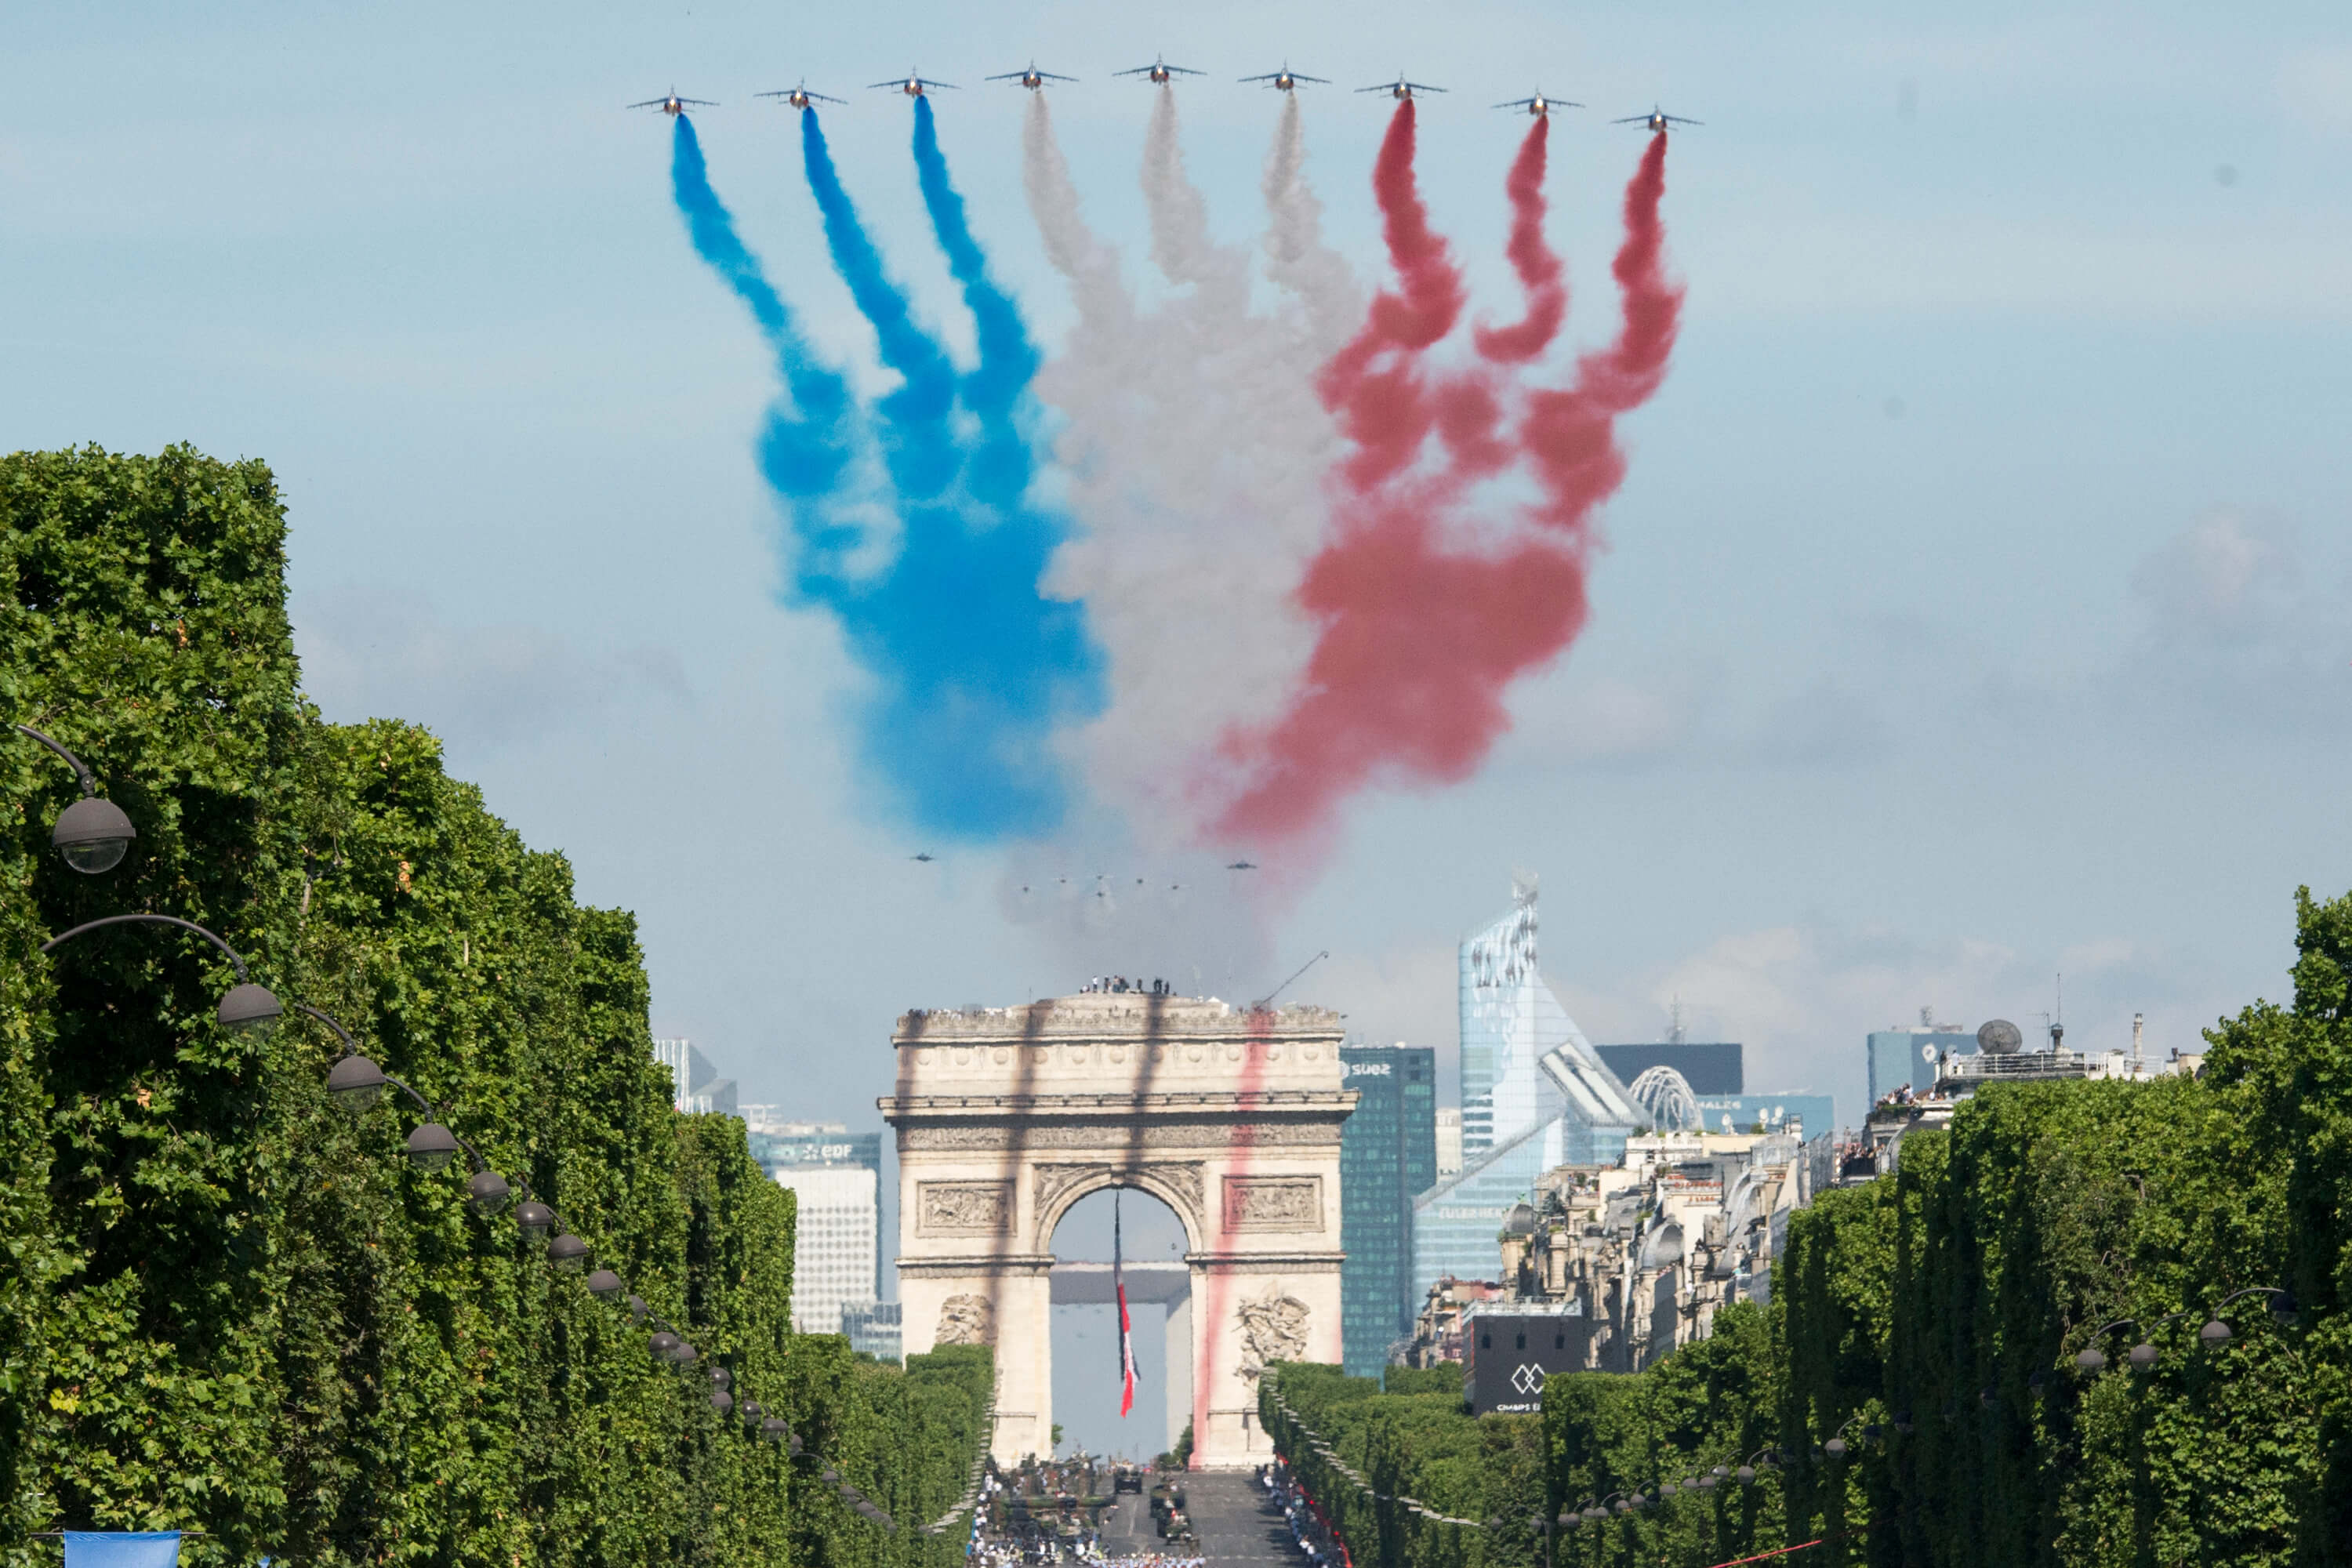 Bouemar - French aircraft fly over the Champs-Elysees during the annual Bastille Day military parade in Paris, July 14, 2017. DoD photo by Navy Petty Officer 2nd Class Dominique Pineiro